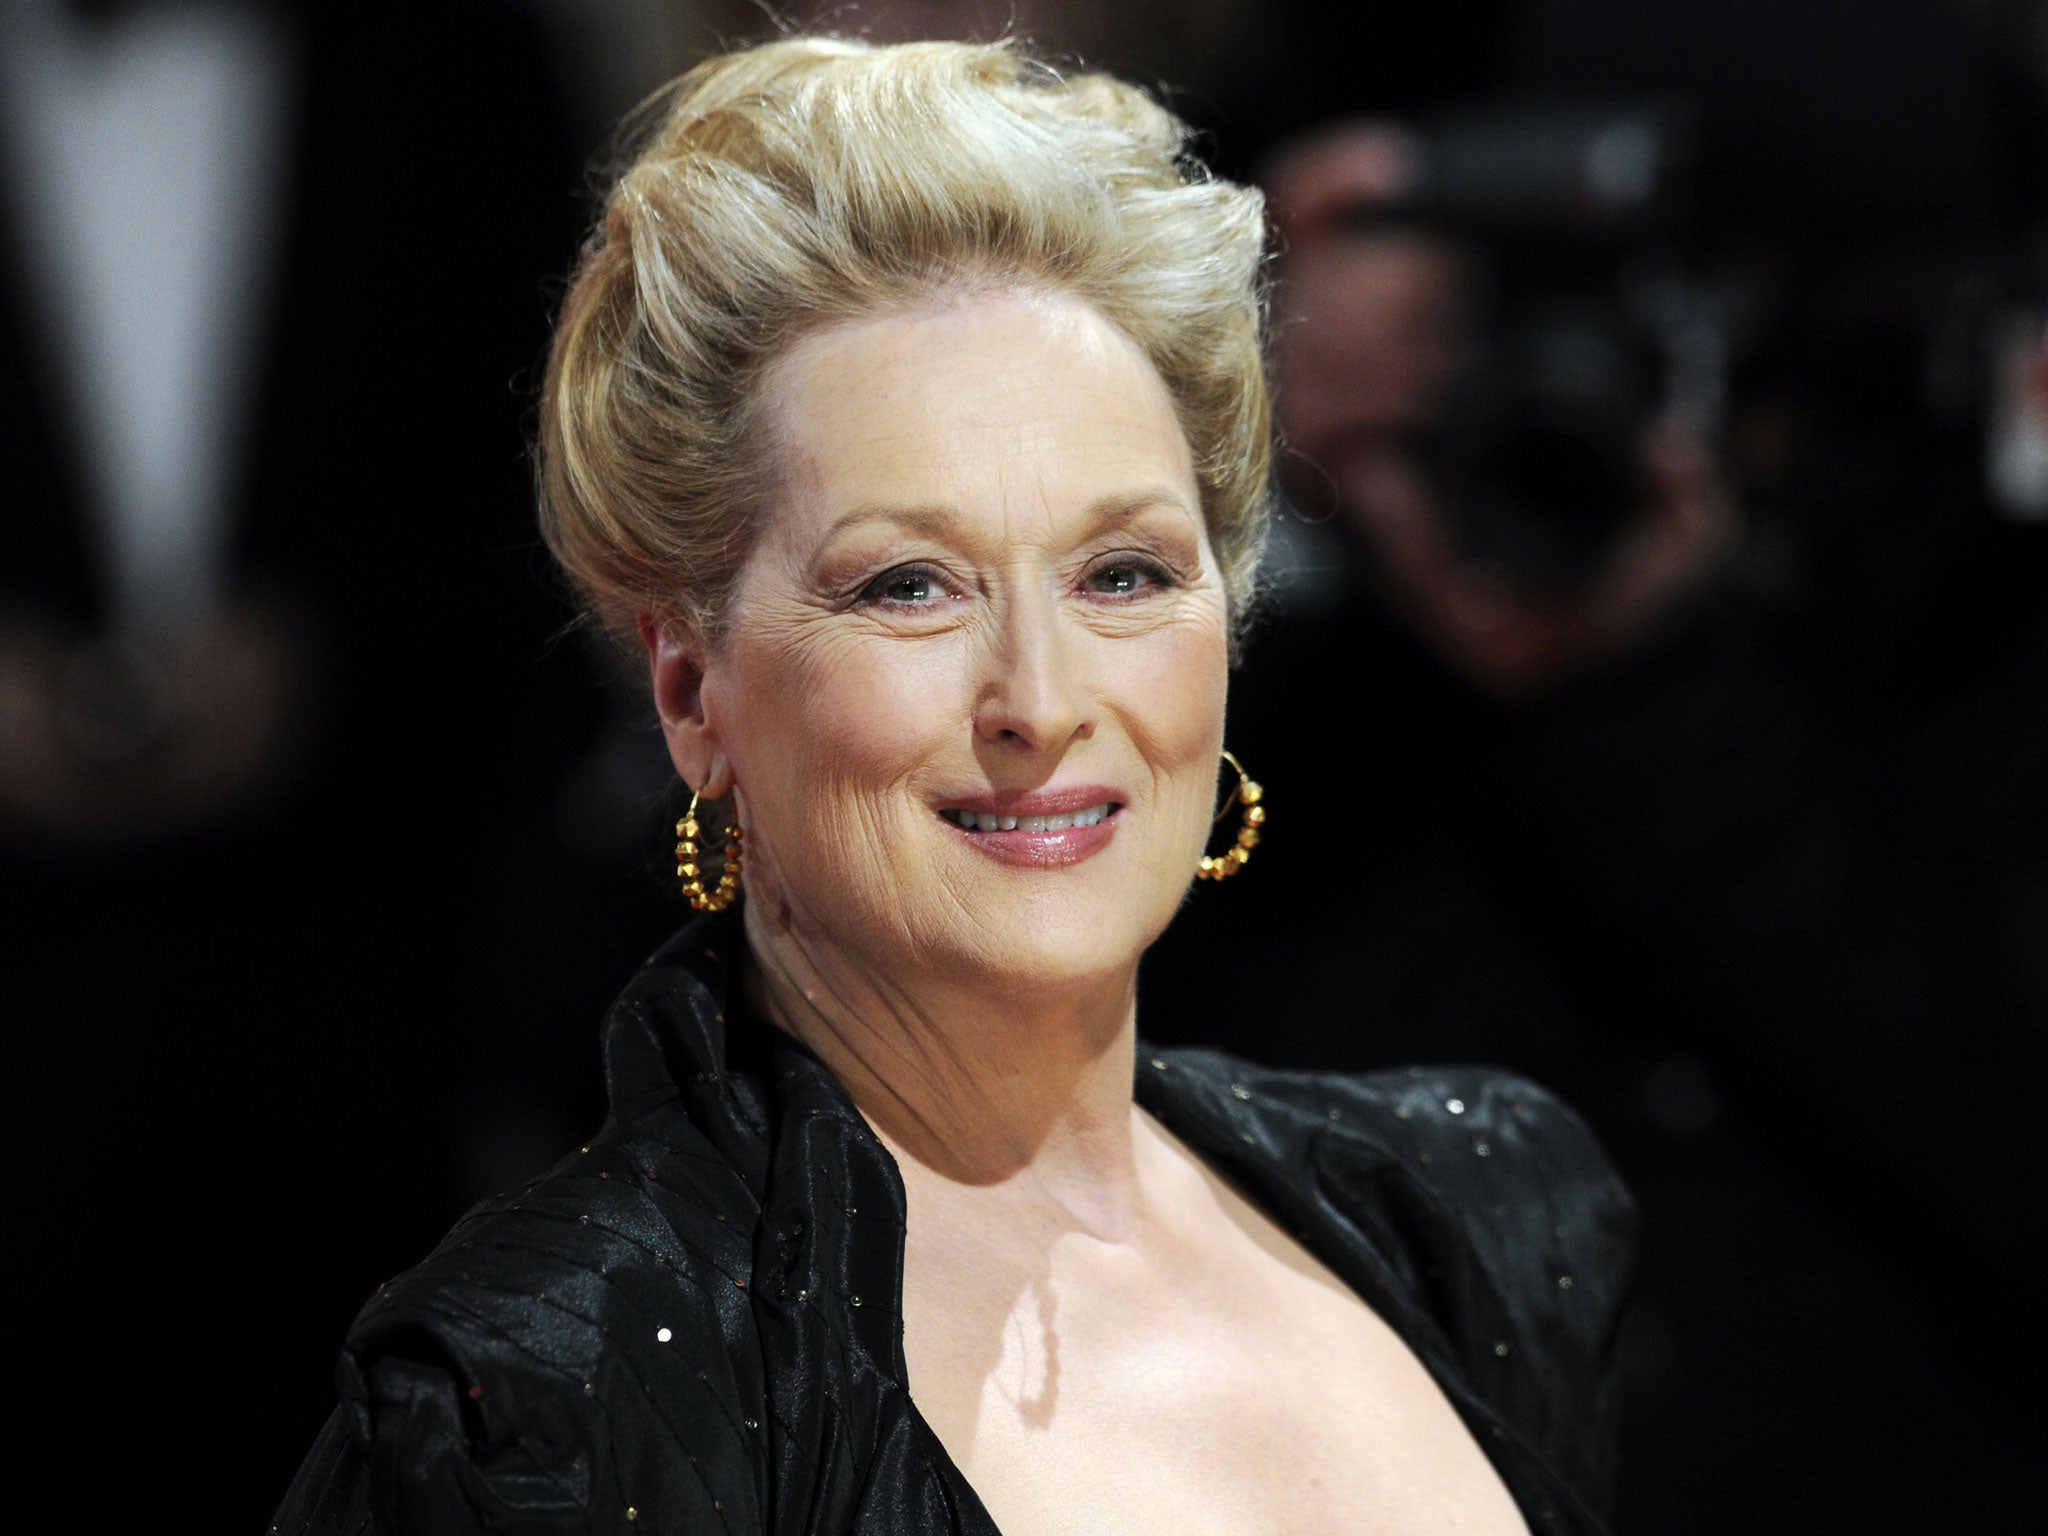 Meryl Streep is among the star-studded list of actors chosen to present awards at this year's Golden Globes